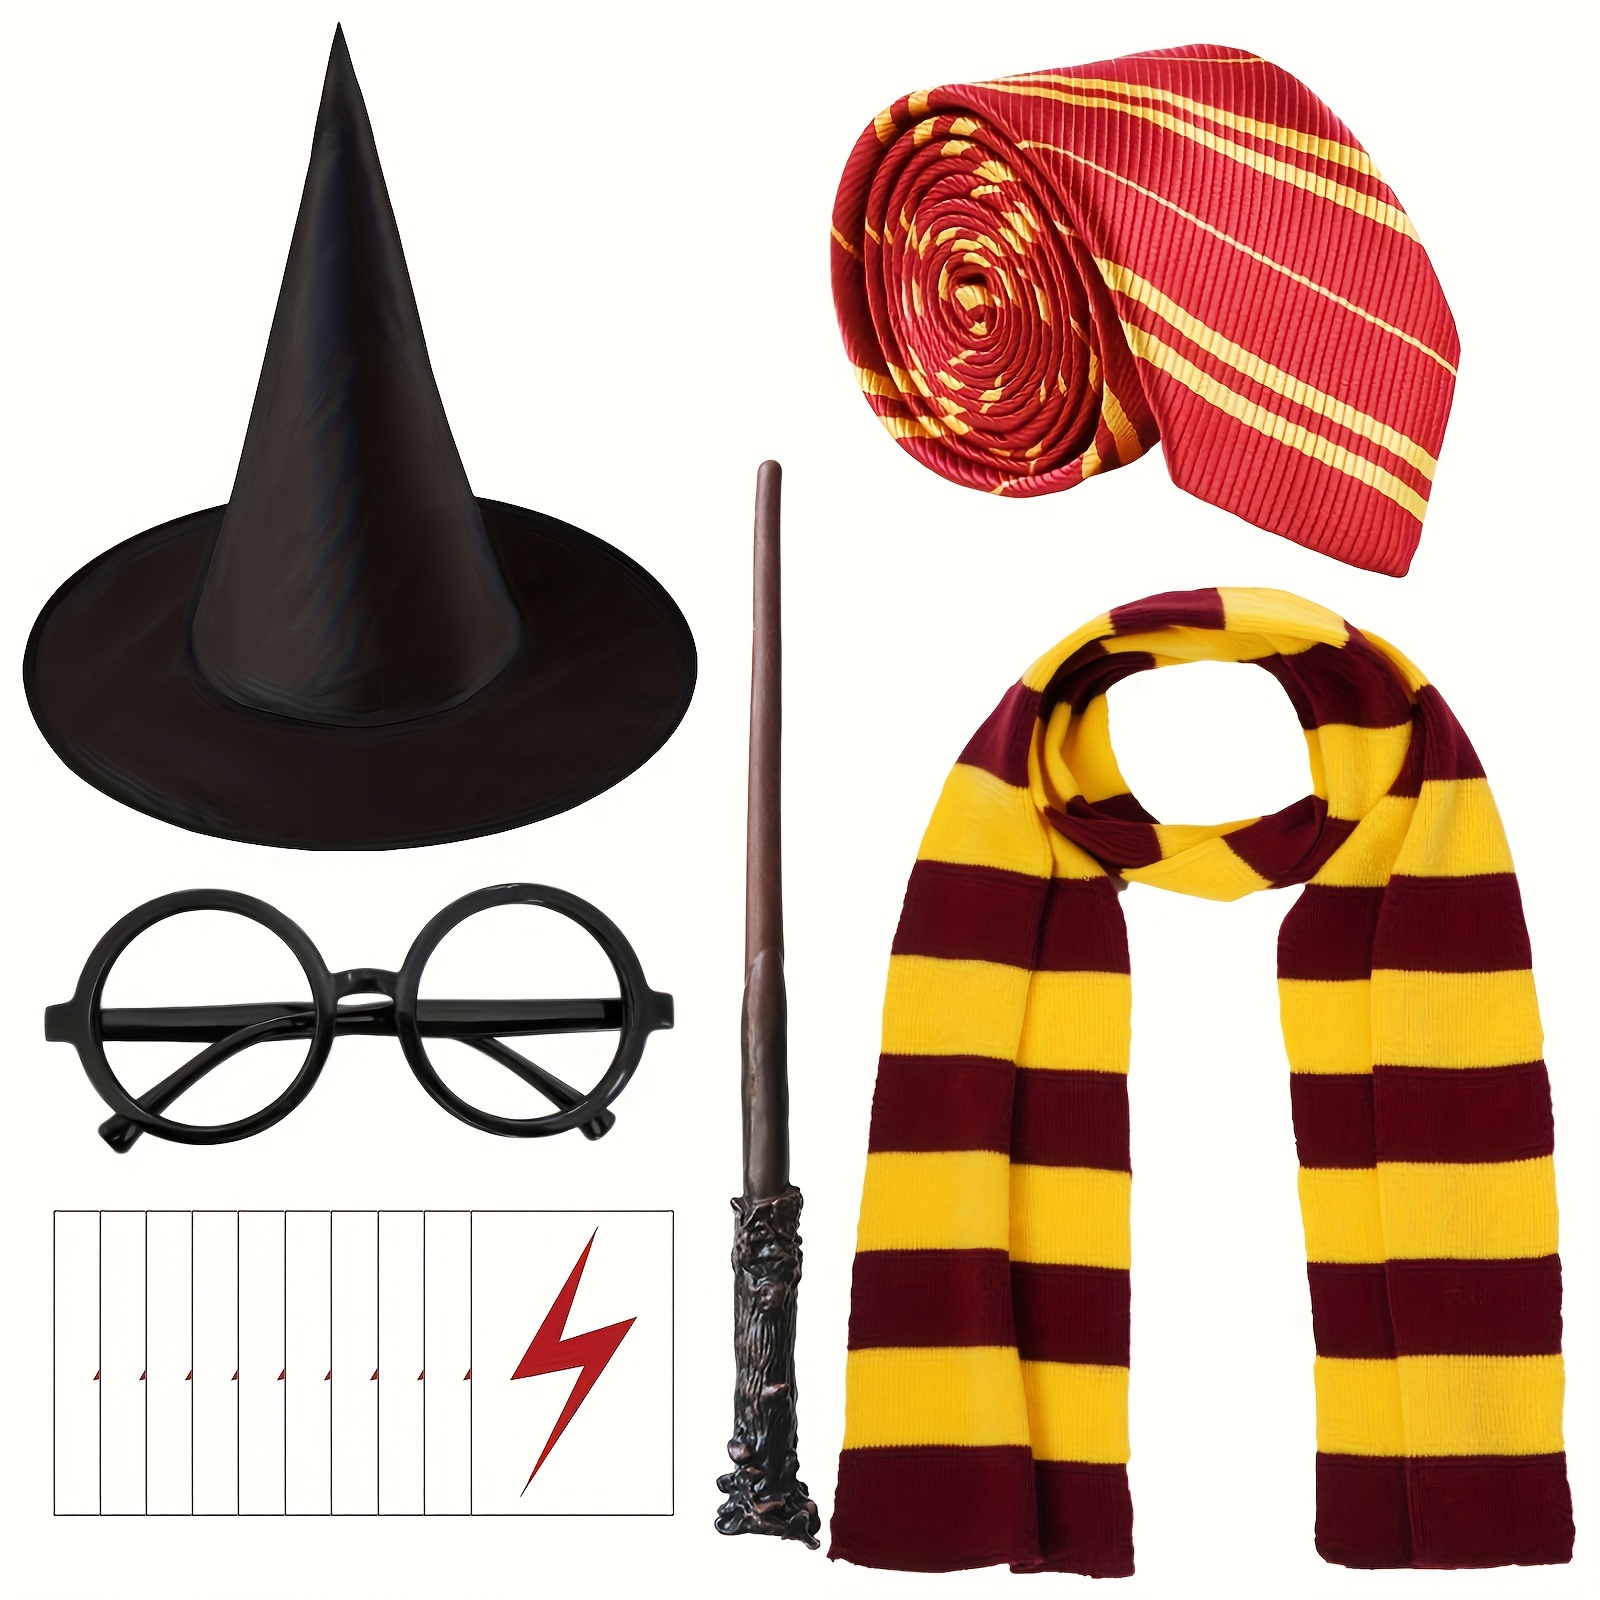 

15pcs Wizard Wizardry Party Costume Set – Black Hat, Glasses, Striped Scarf, Tie, Magic Wand, Tattoos – World Book Day, Halloween Dress-up, Cosplay Accessories Kit